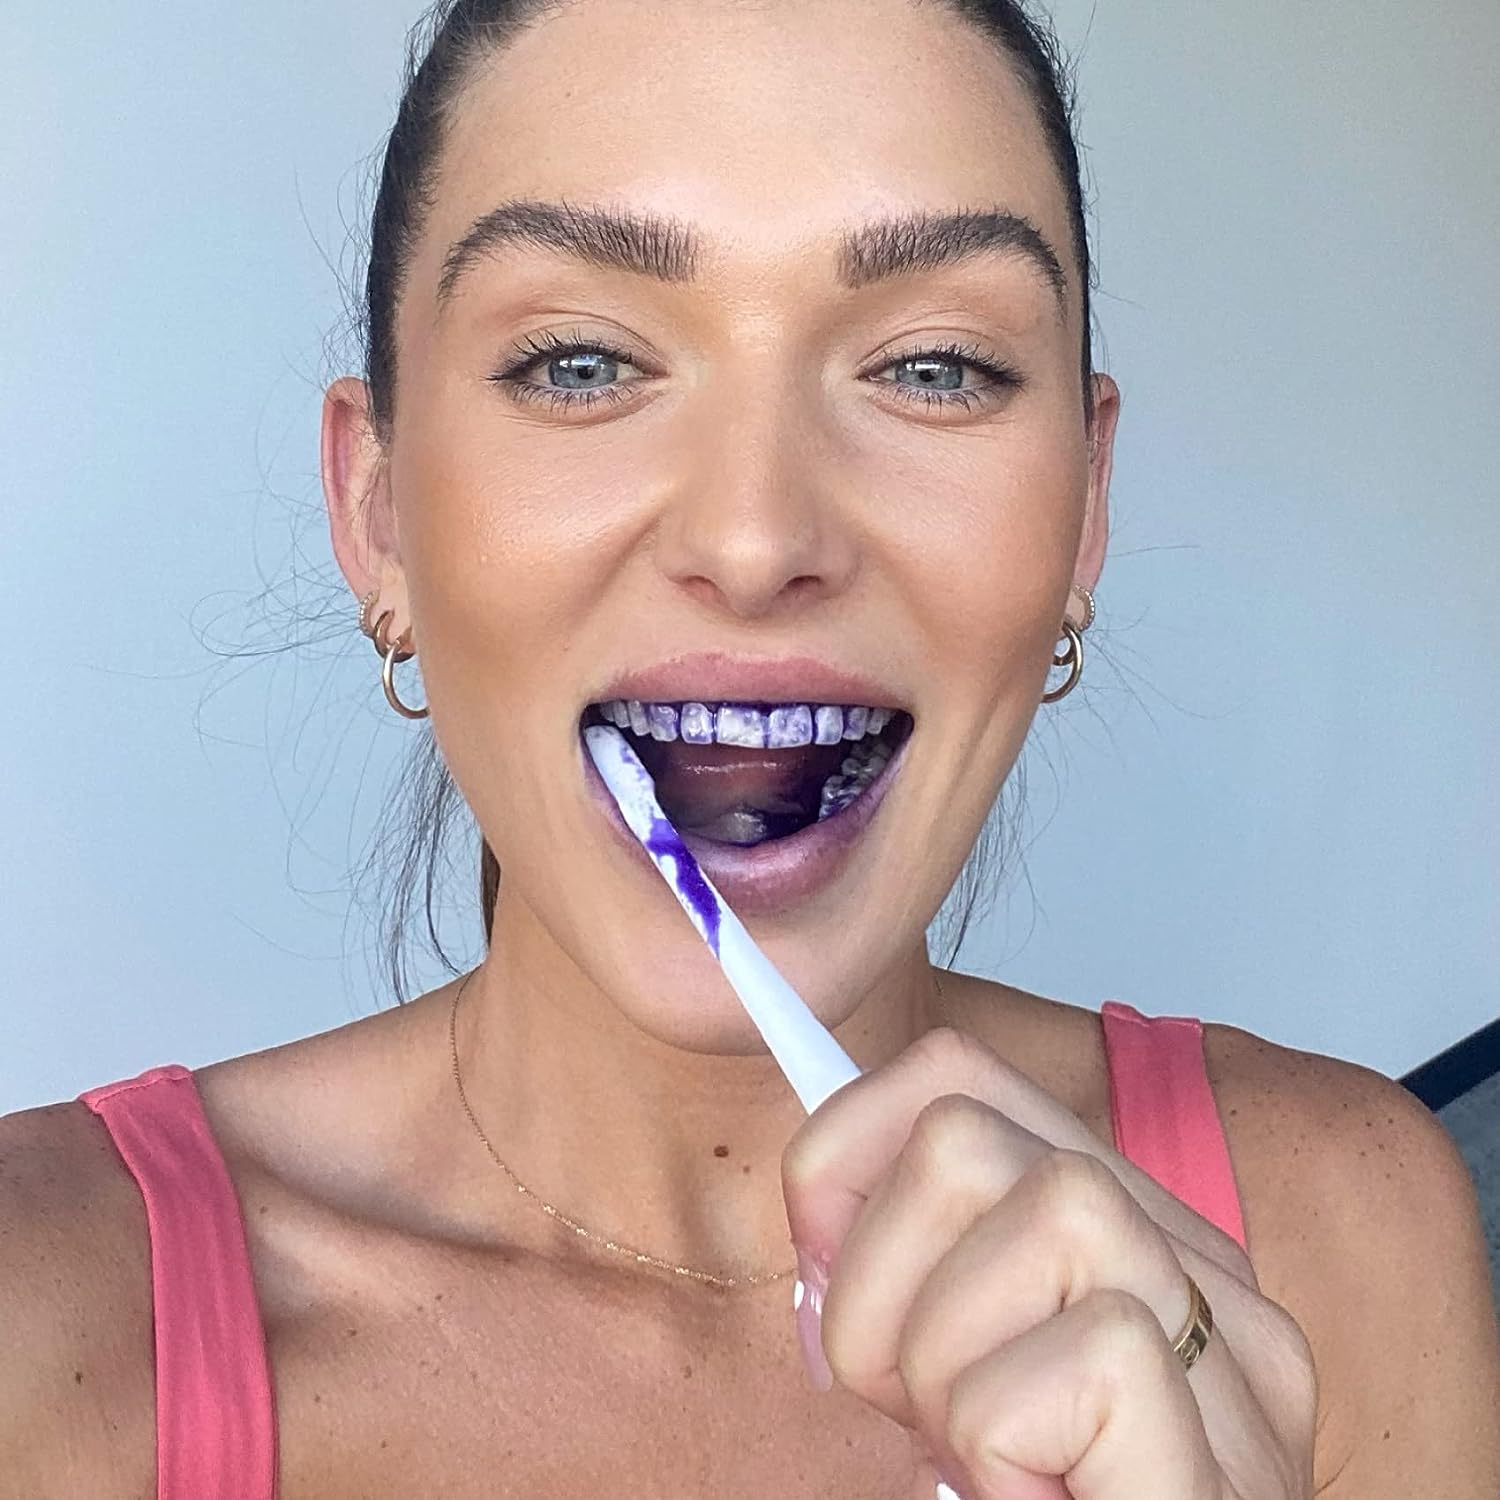 Hismile v34 Colour Corrector, Tooth Stain Removal, Teeth Whitening Booster, Purple Toothpaste, Colour Correcting, Hismile V34